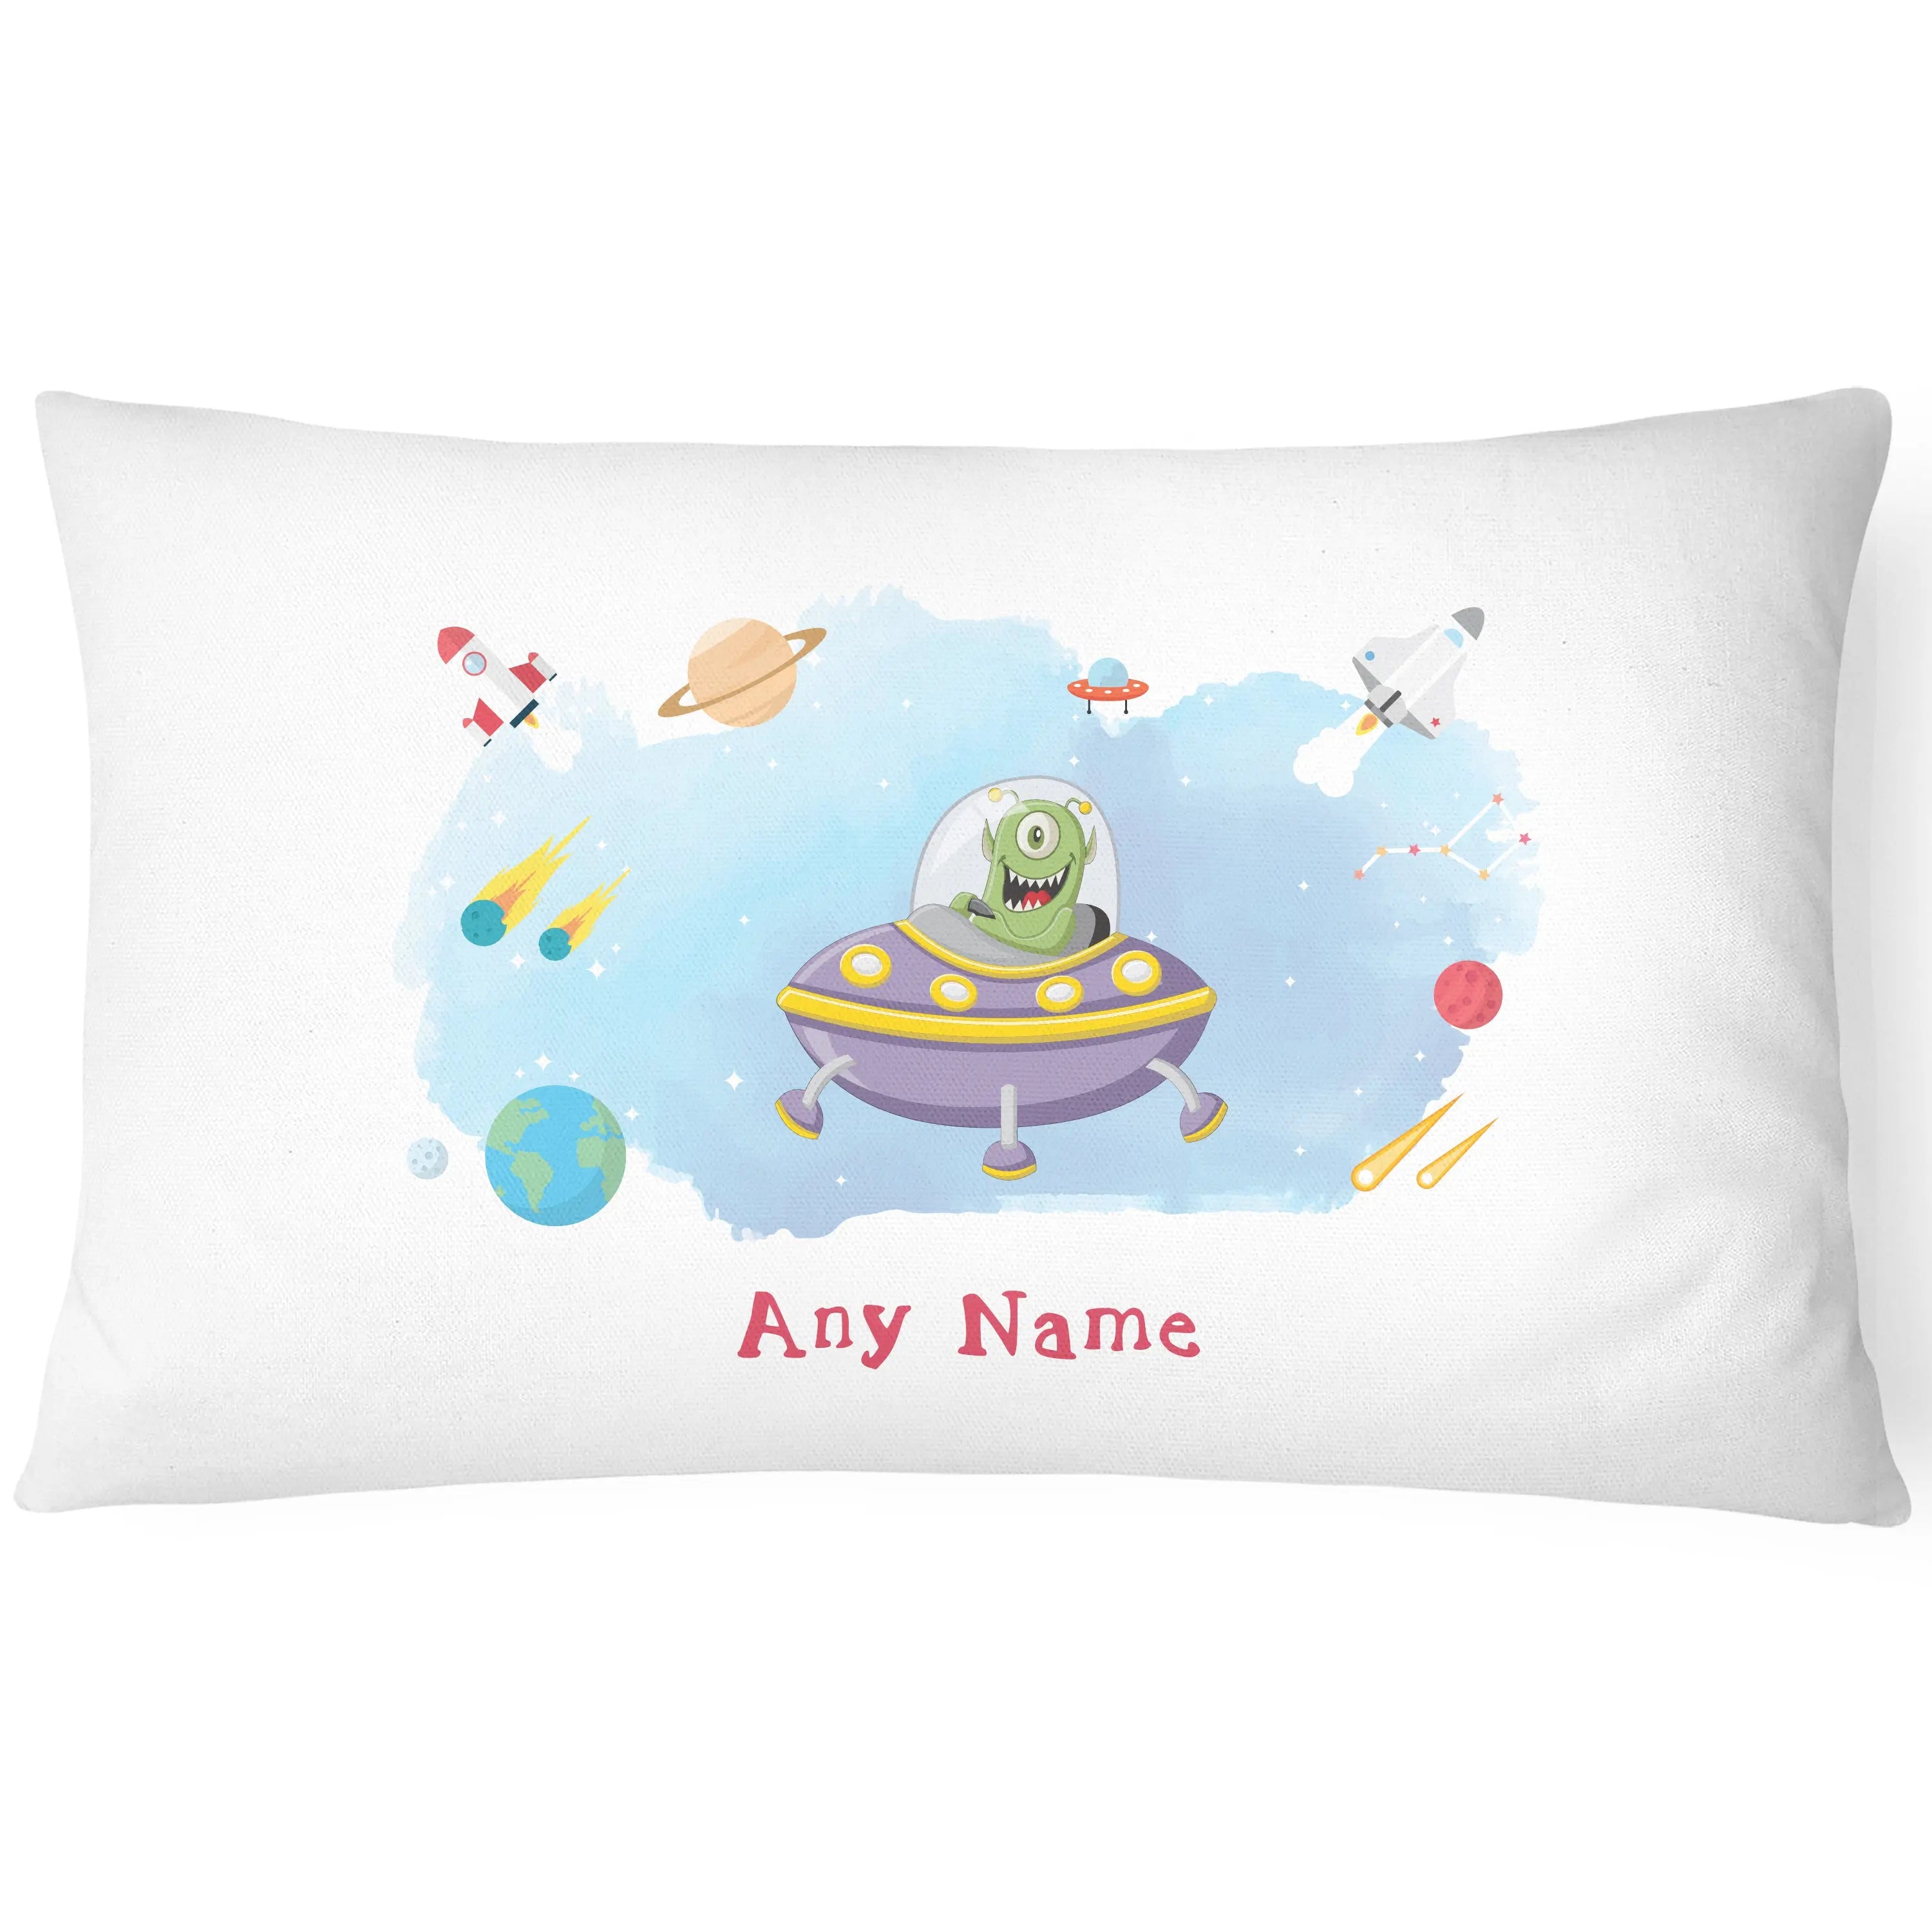 Space Pillowcase for Kids - Personalise With Any Name - Outer World - CushionPop